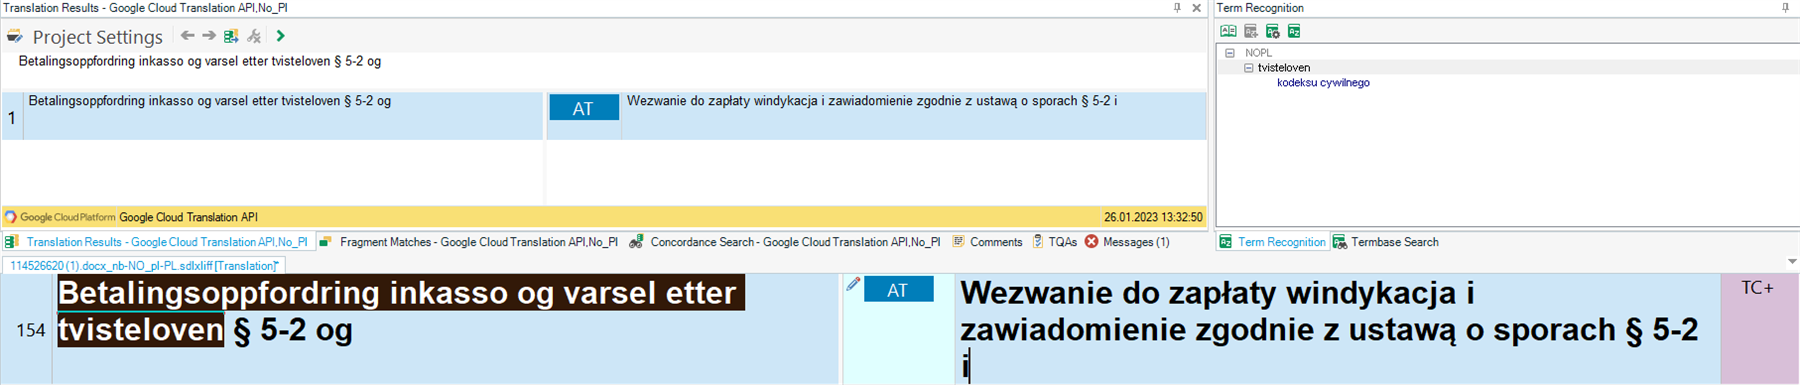 Screenshot of Trados Studio showing a translation match labeled 'AT' from Google Cloud Translation instead of a 100% match from the translation memory.